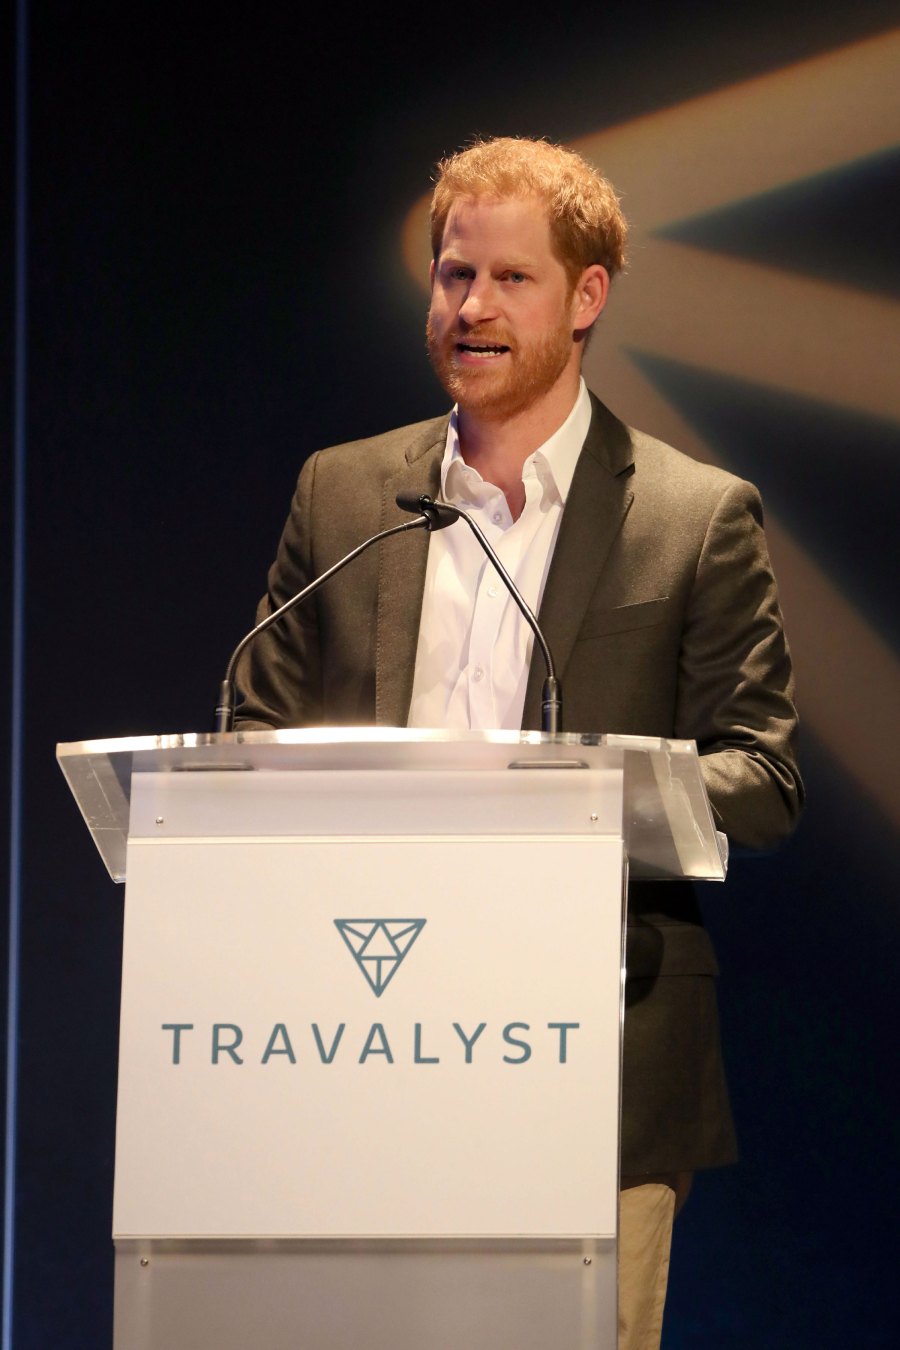 Prince Harry Asks to Be Called Just ‘Harry’ at 1st U.K. Event Since Canada Move